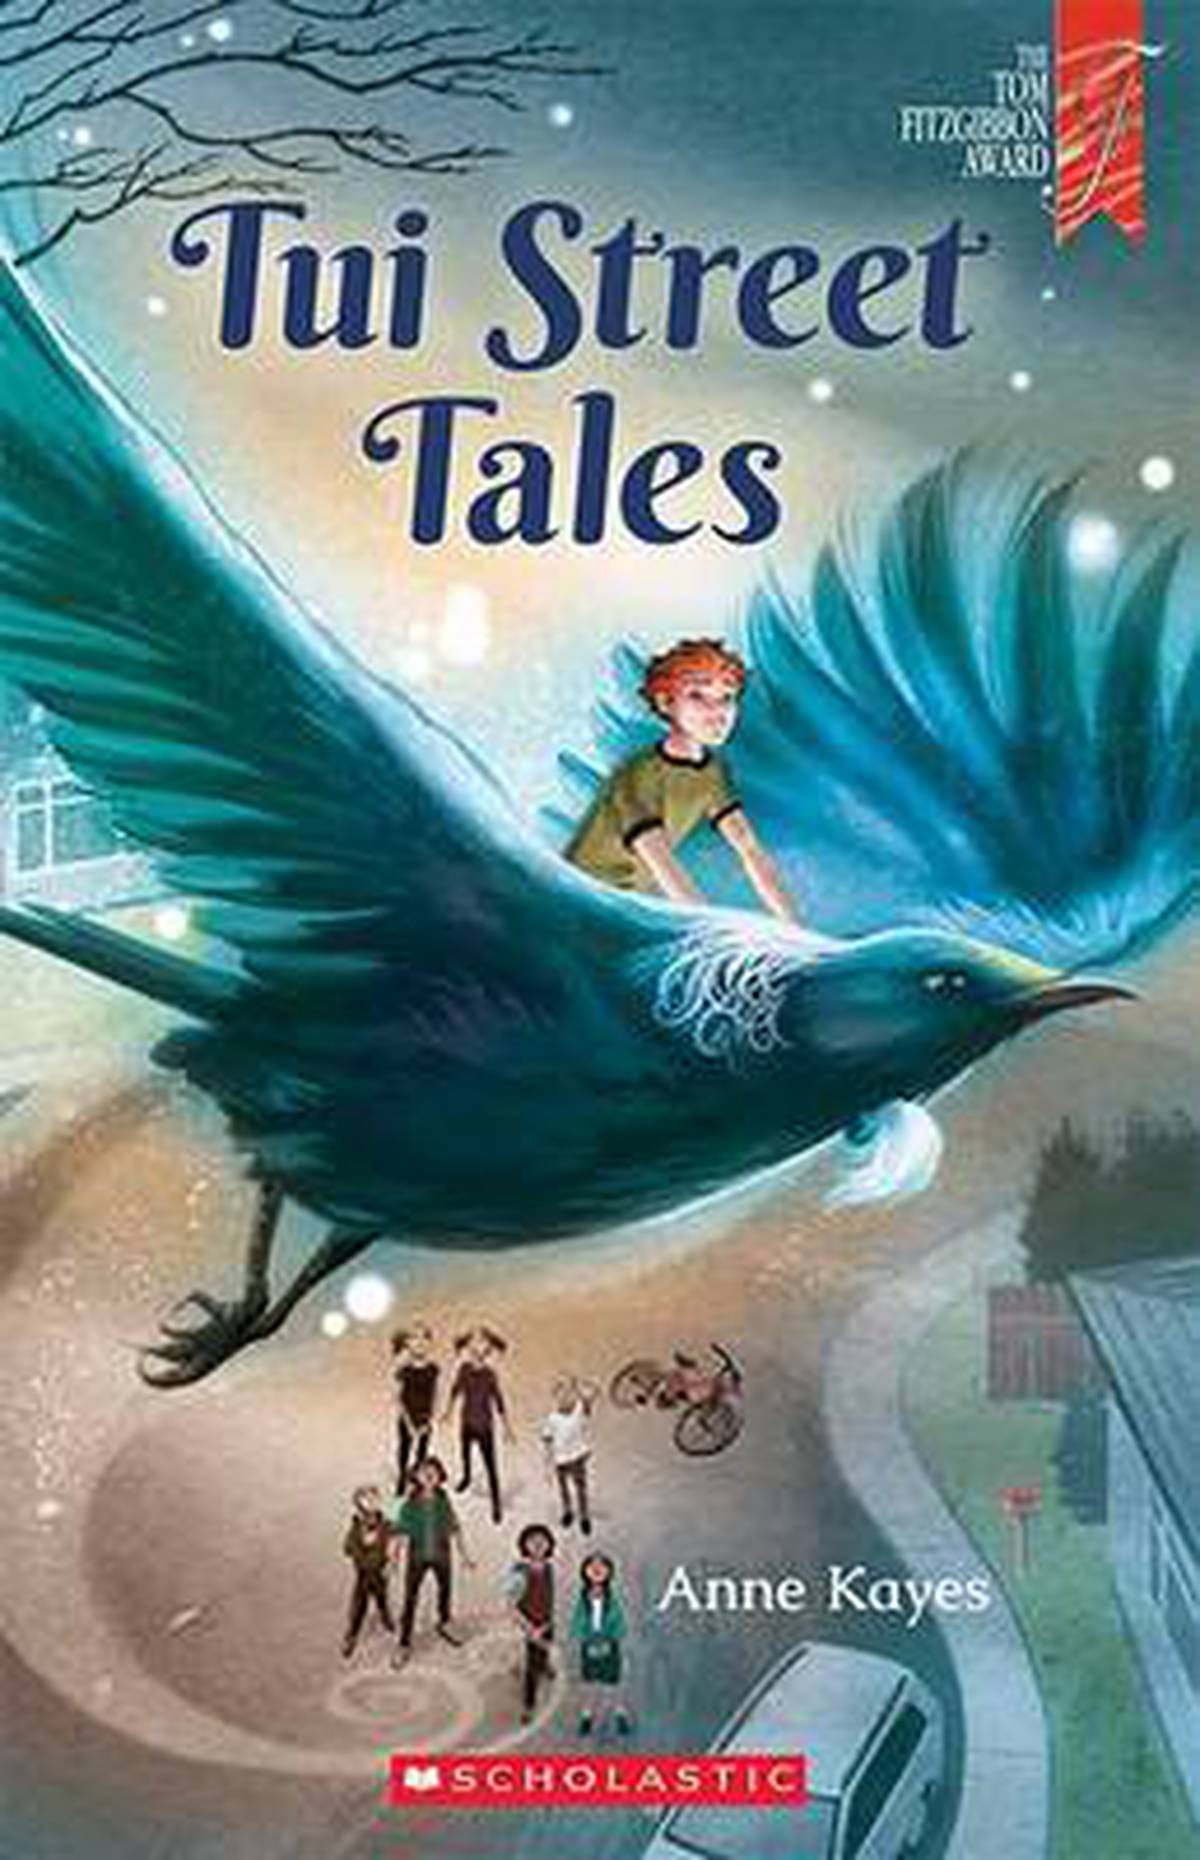 Book review: Tui Street Tales - NZ Herald